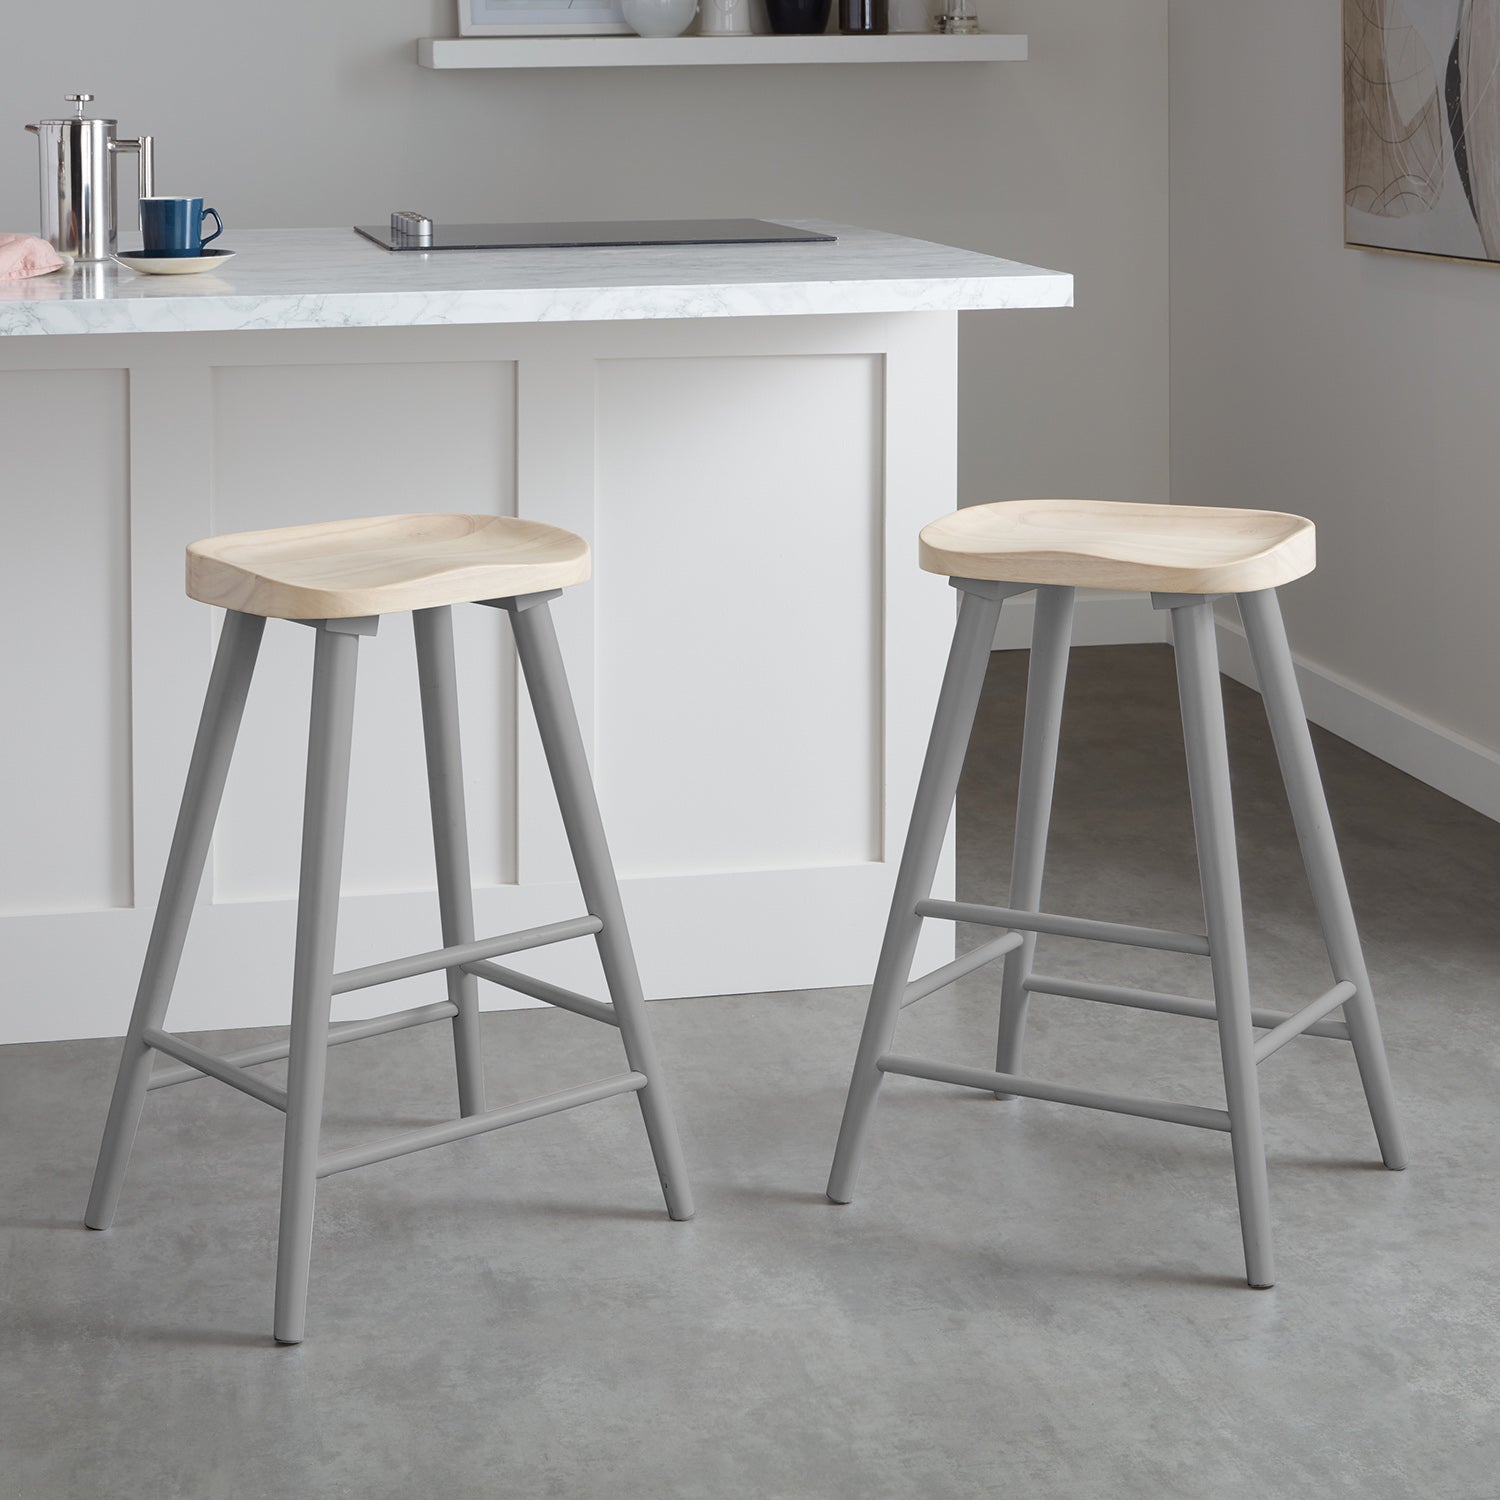 Silvester bar stool - grey frame with whitewash top - Laura James